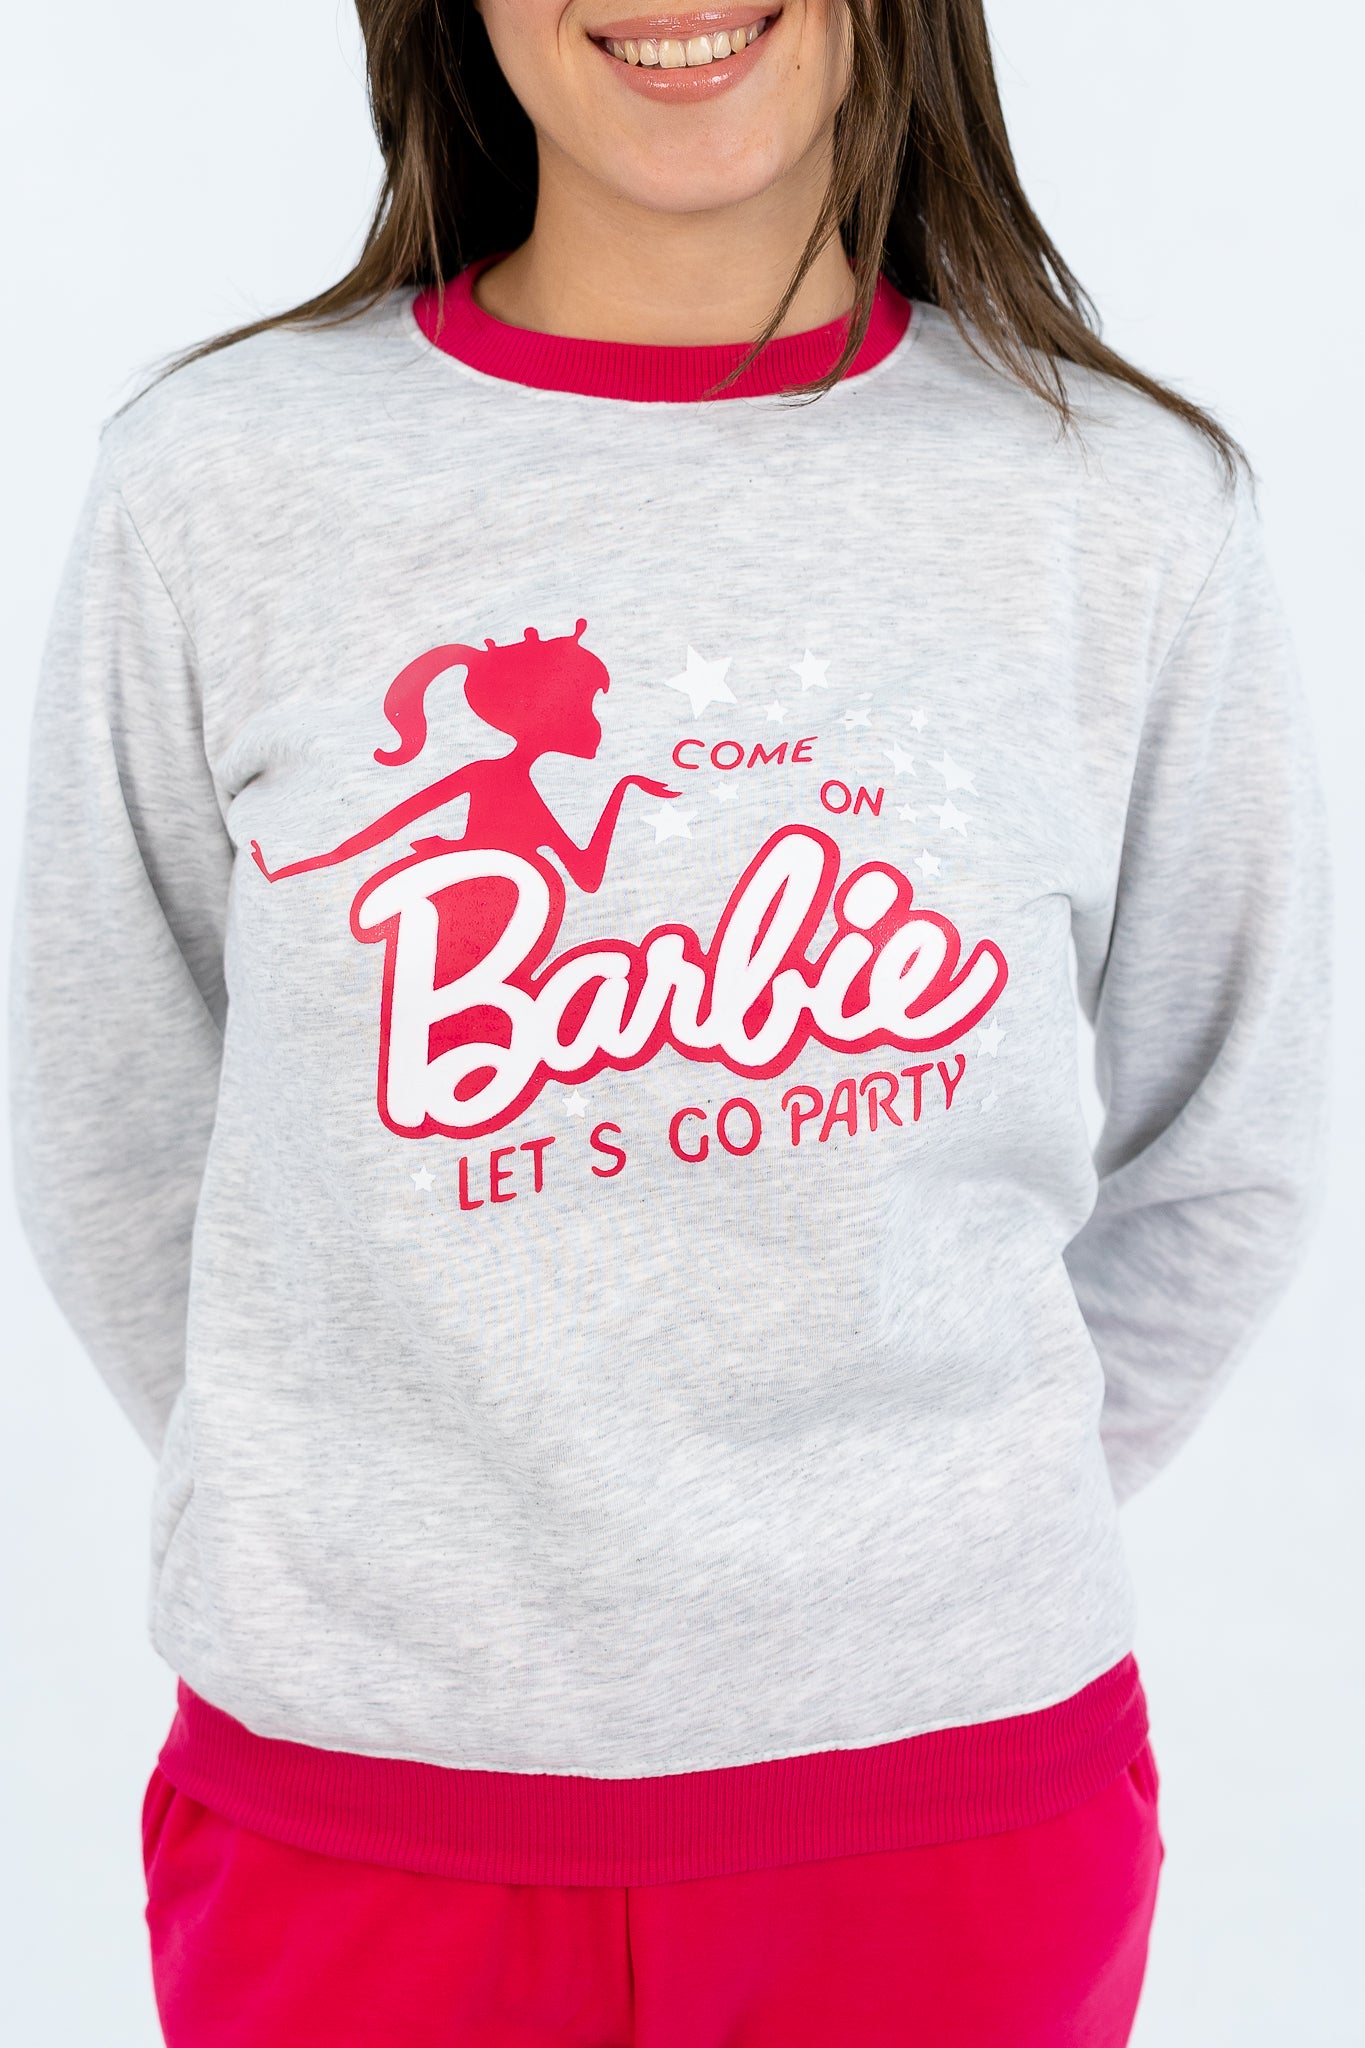 Girl's winter pajamas with barbie lets go party print - Gray